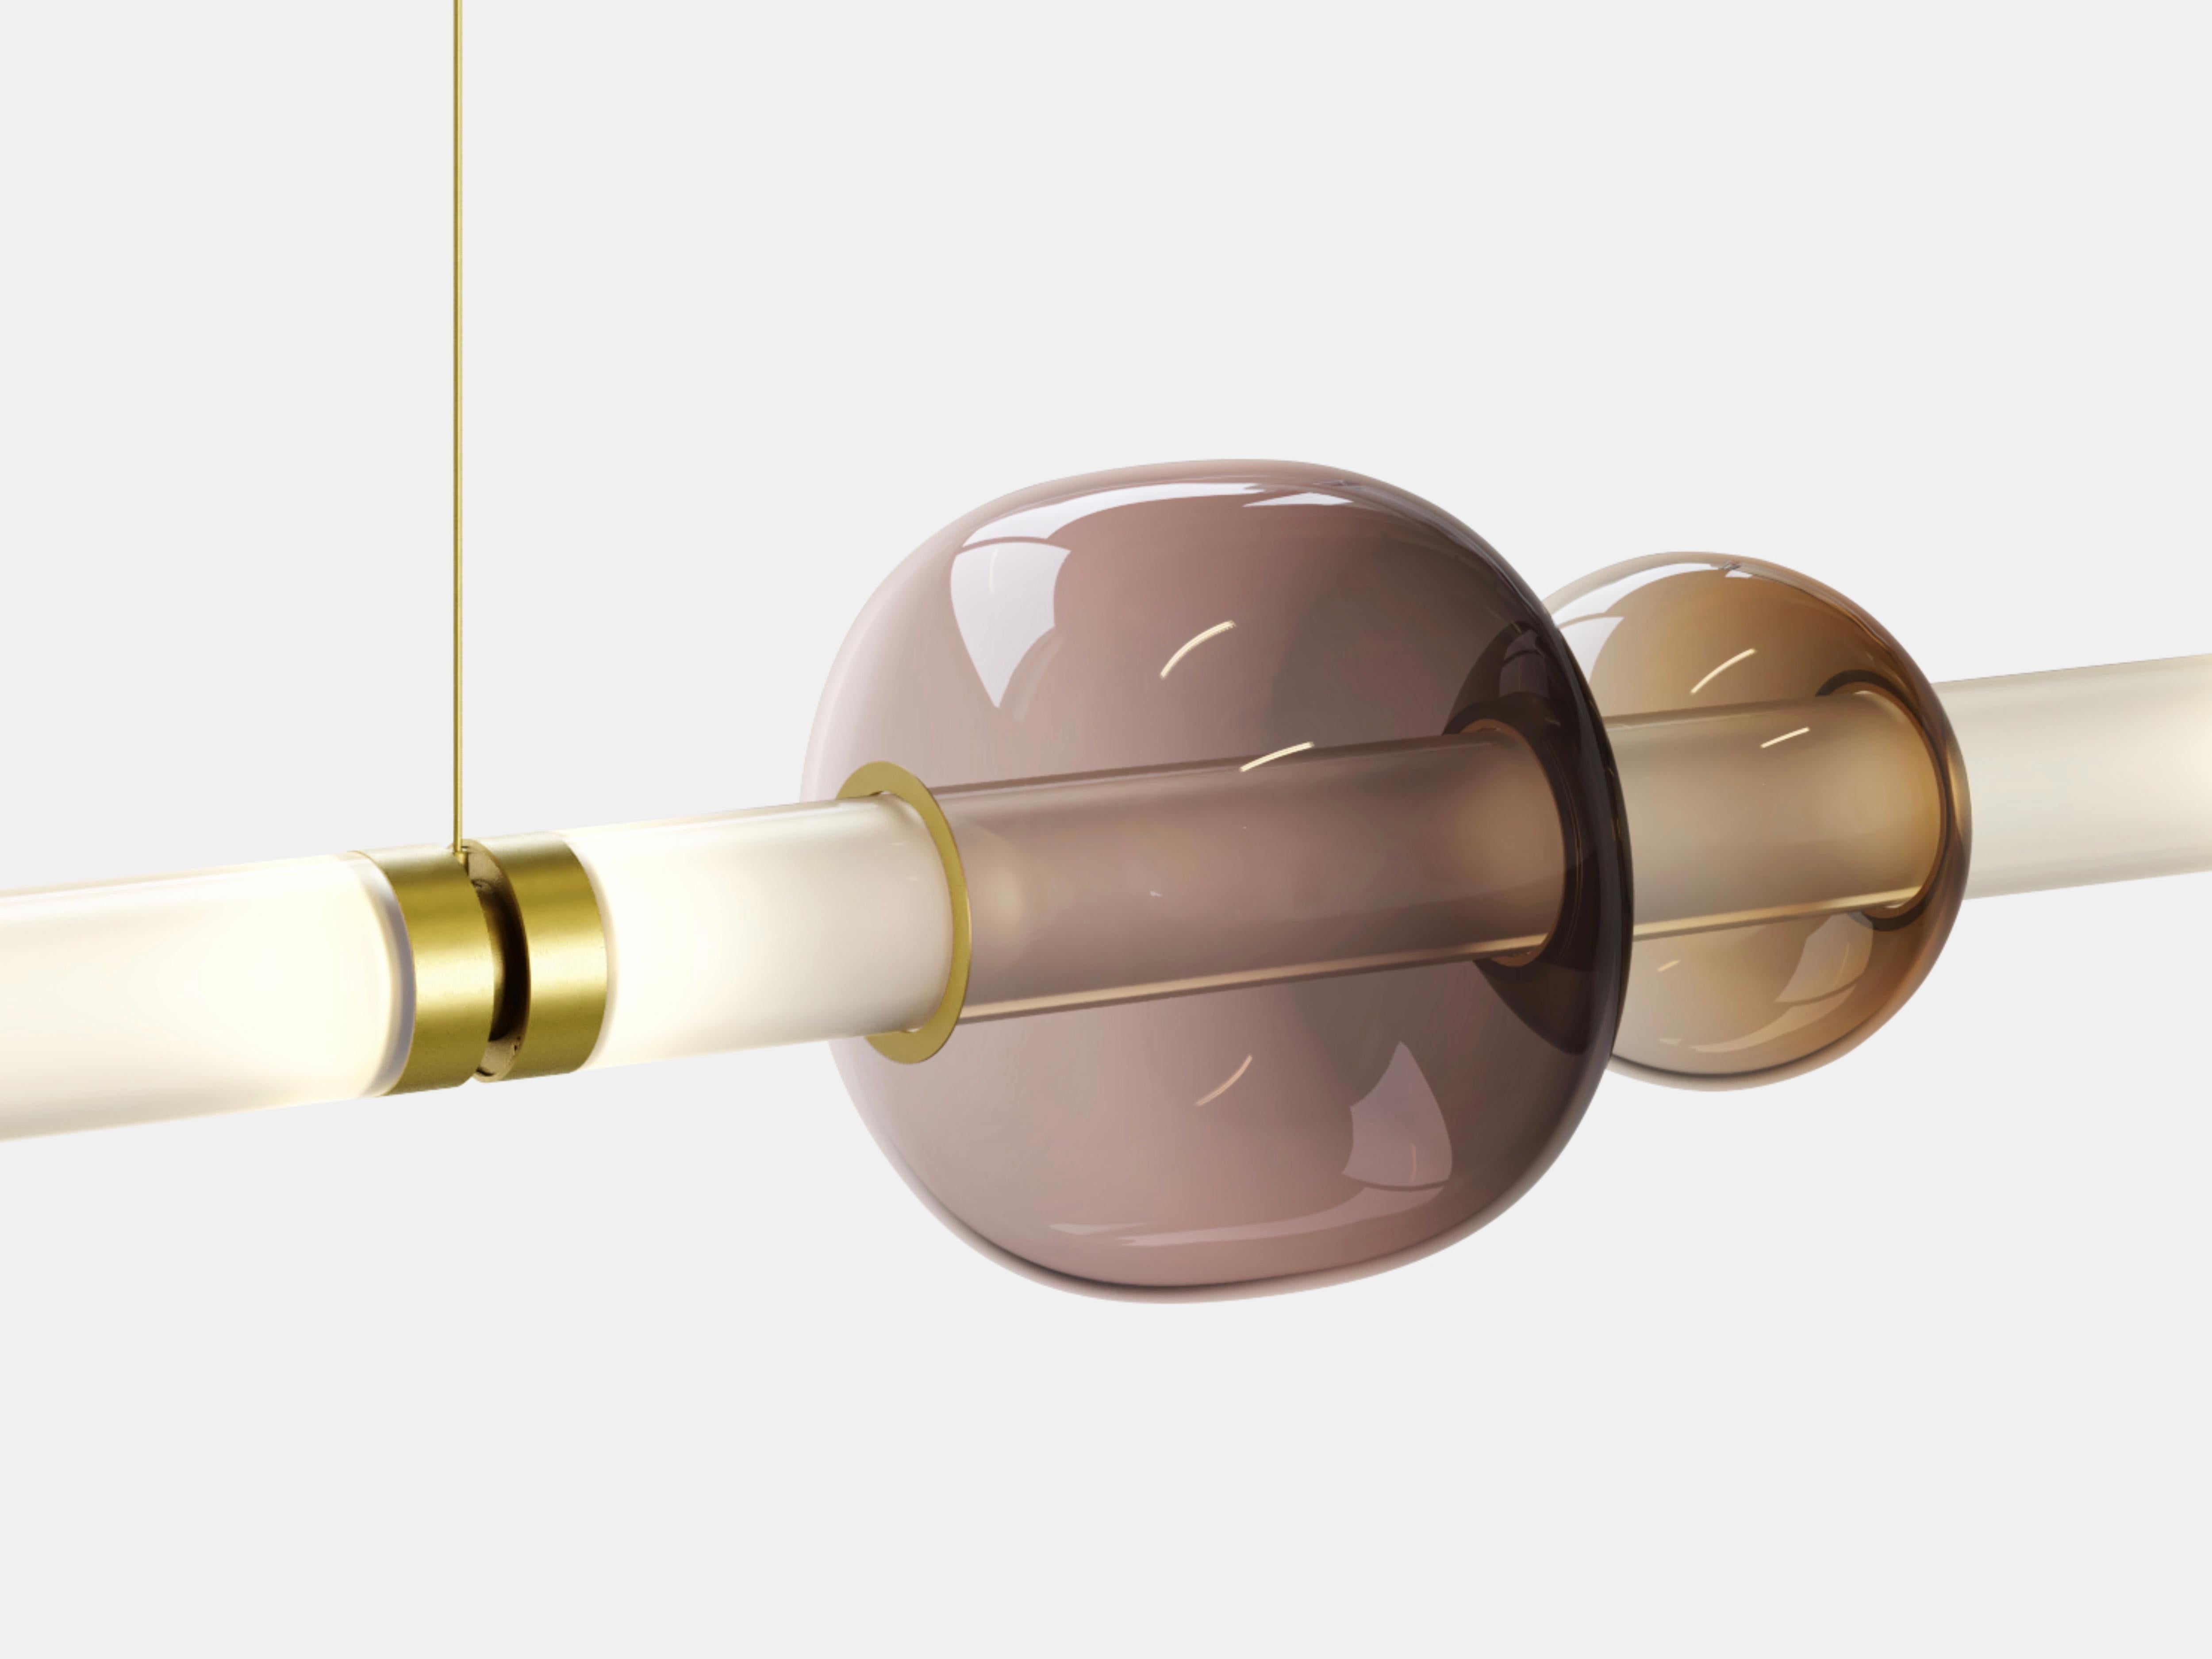 A lighting system with infinite interpretations, the Luna Chandelier 1 Tier  is a synergy of color, shape, and refracted light. Inspired by a lunar halo, the modular light fixture grows in every direction as its assembly system stems horizontally or